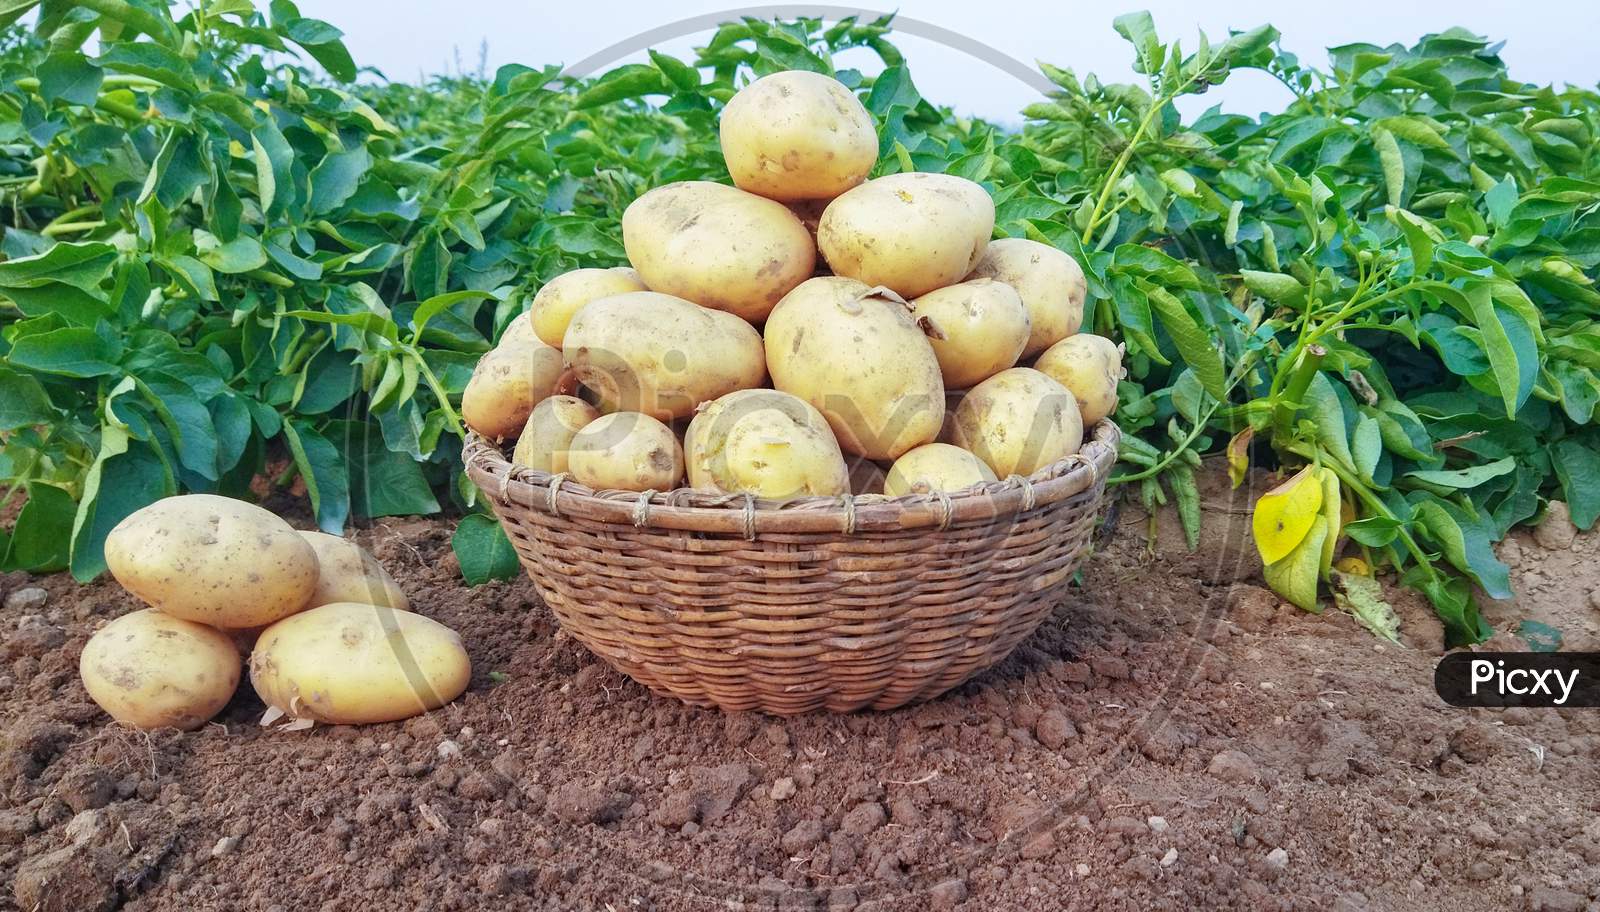 Fresh Potato In The Busket. Fresh Organic Potatoes In The Field, Harvesting Potatoes From Soil